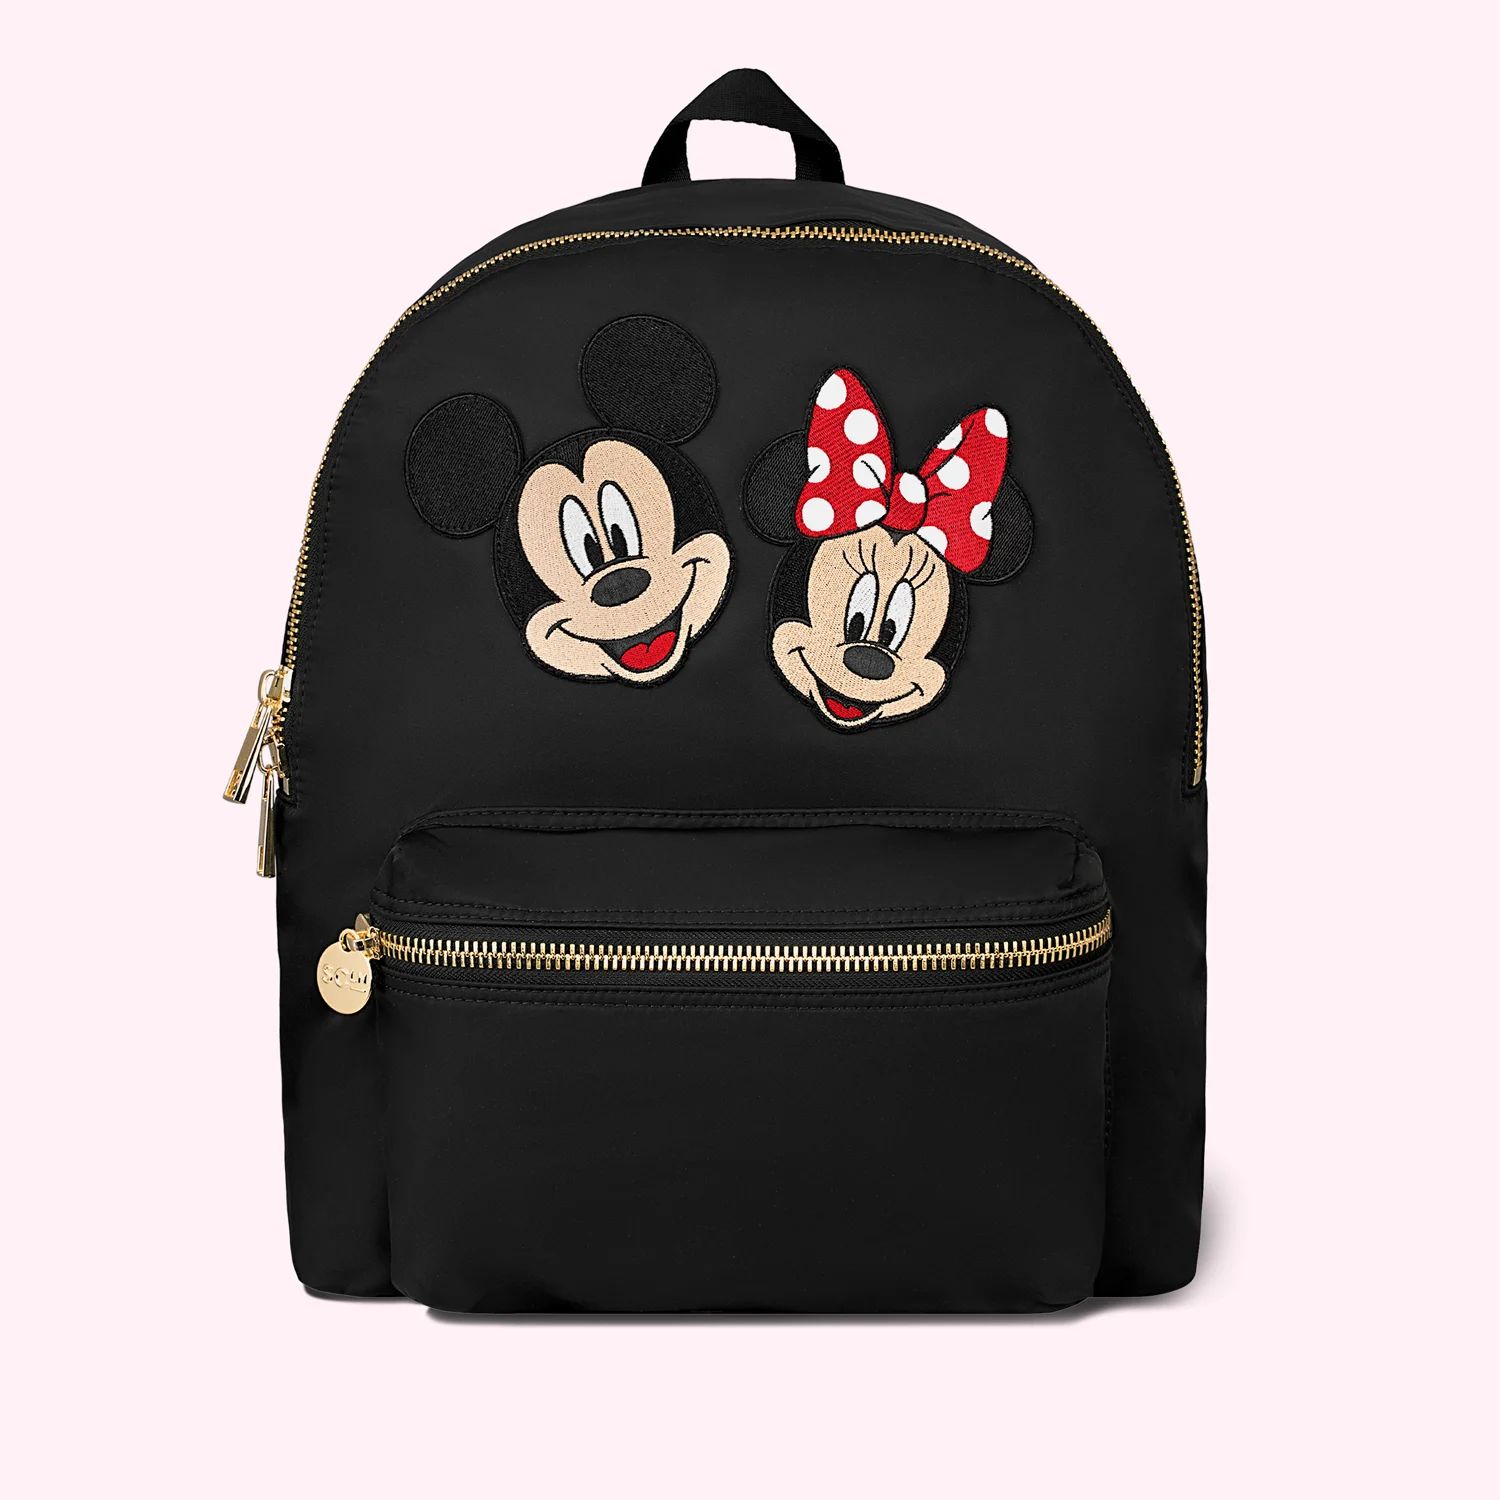 Classic Noir Backpack with Large Mickey & Minnie Patch | Stoney Clover Lane